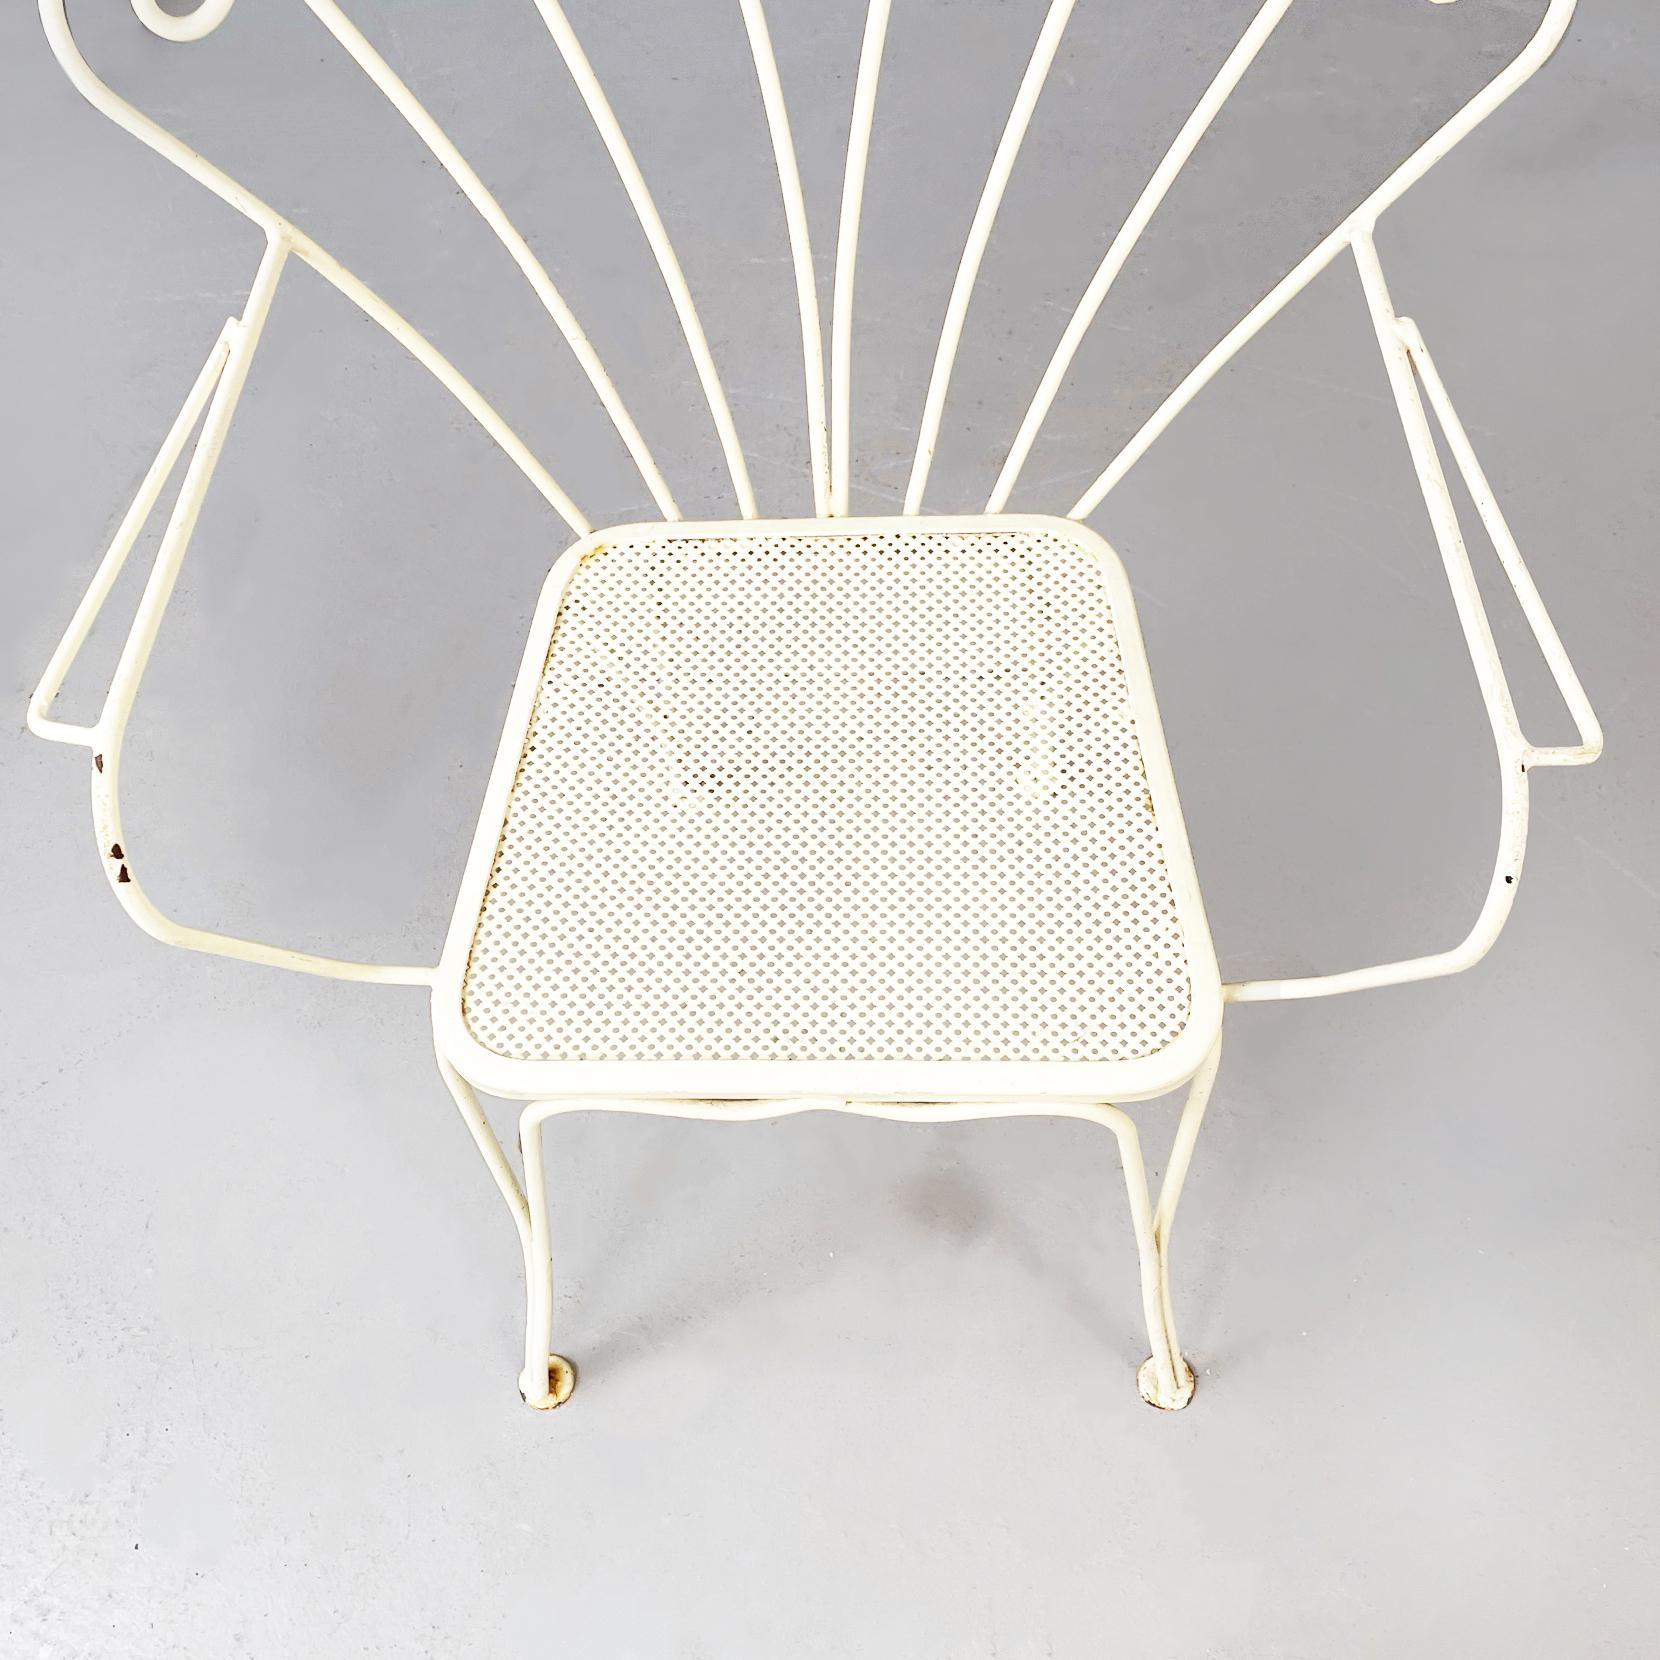 Italian Mid-Century Modern Garden Chairs in White Wrought Iron, 1960s For Sale 1